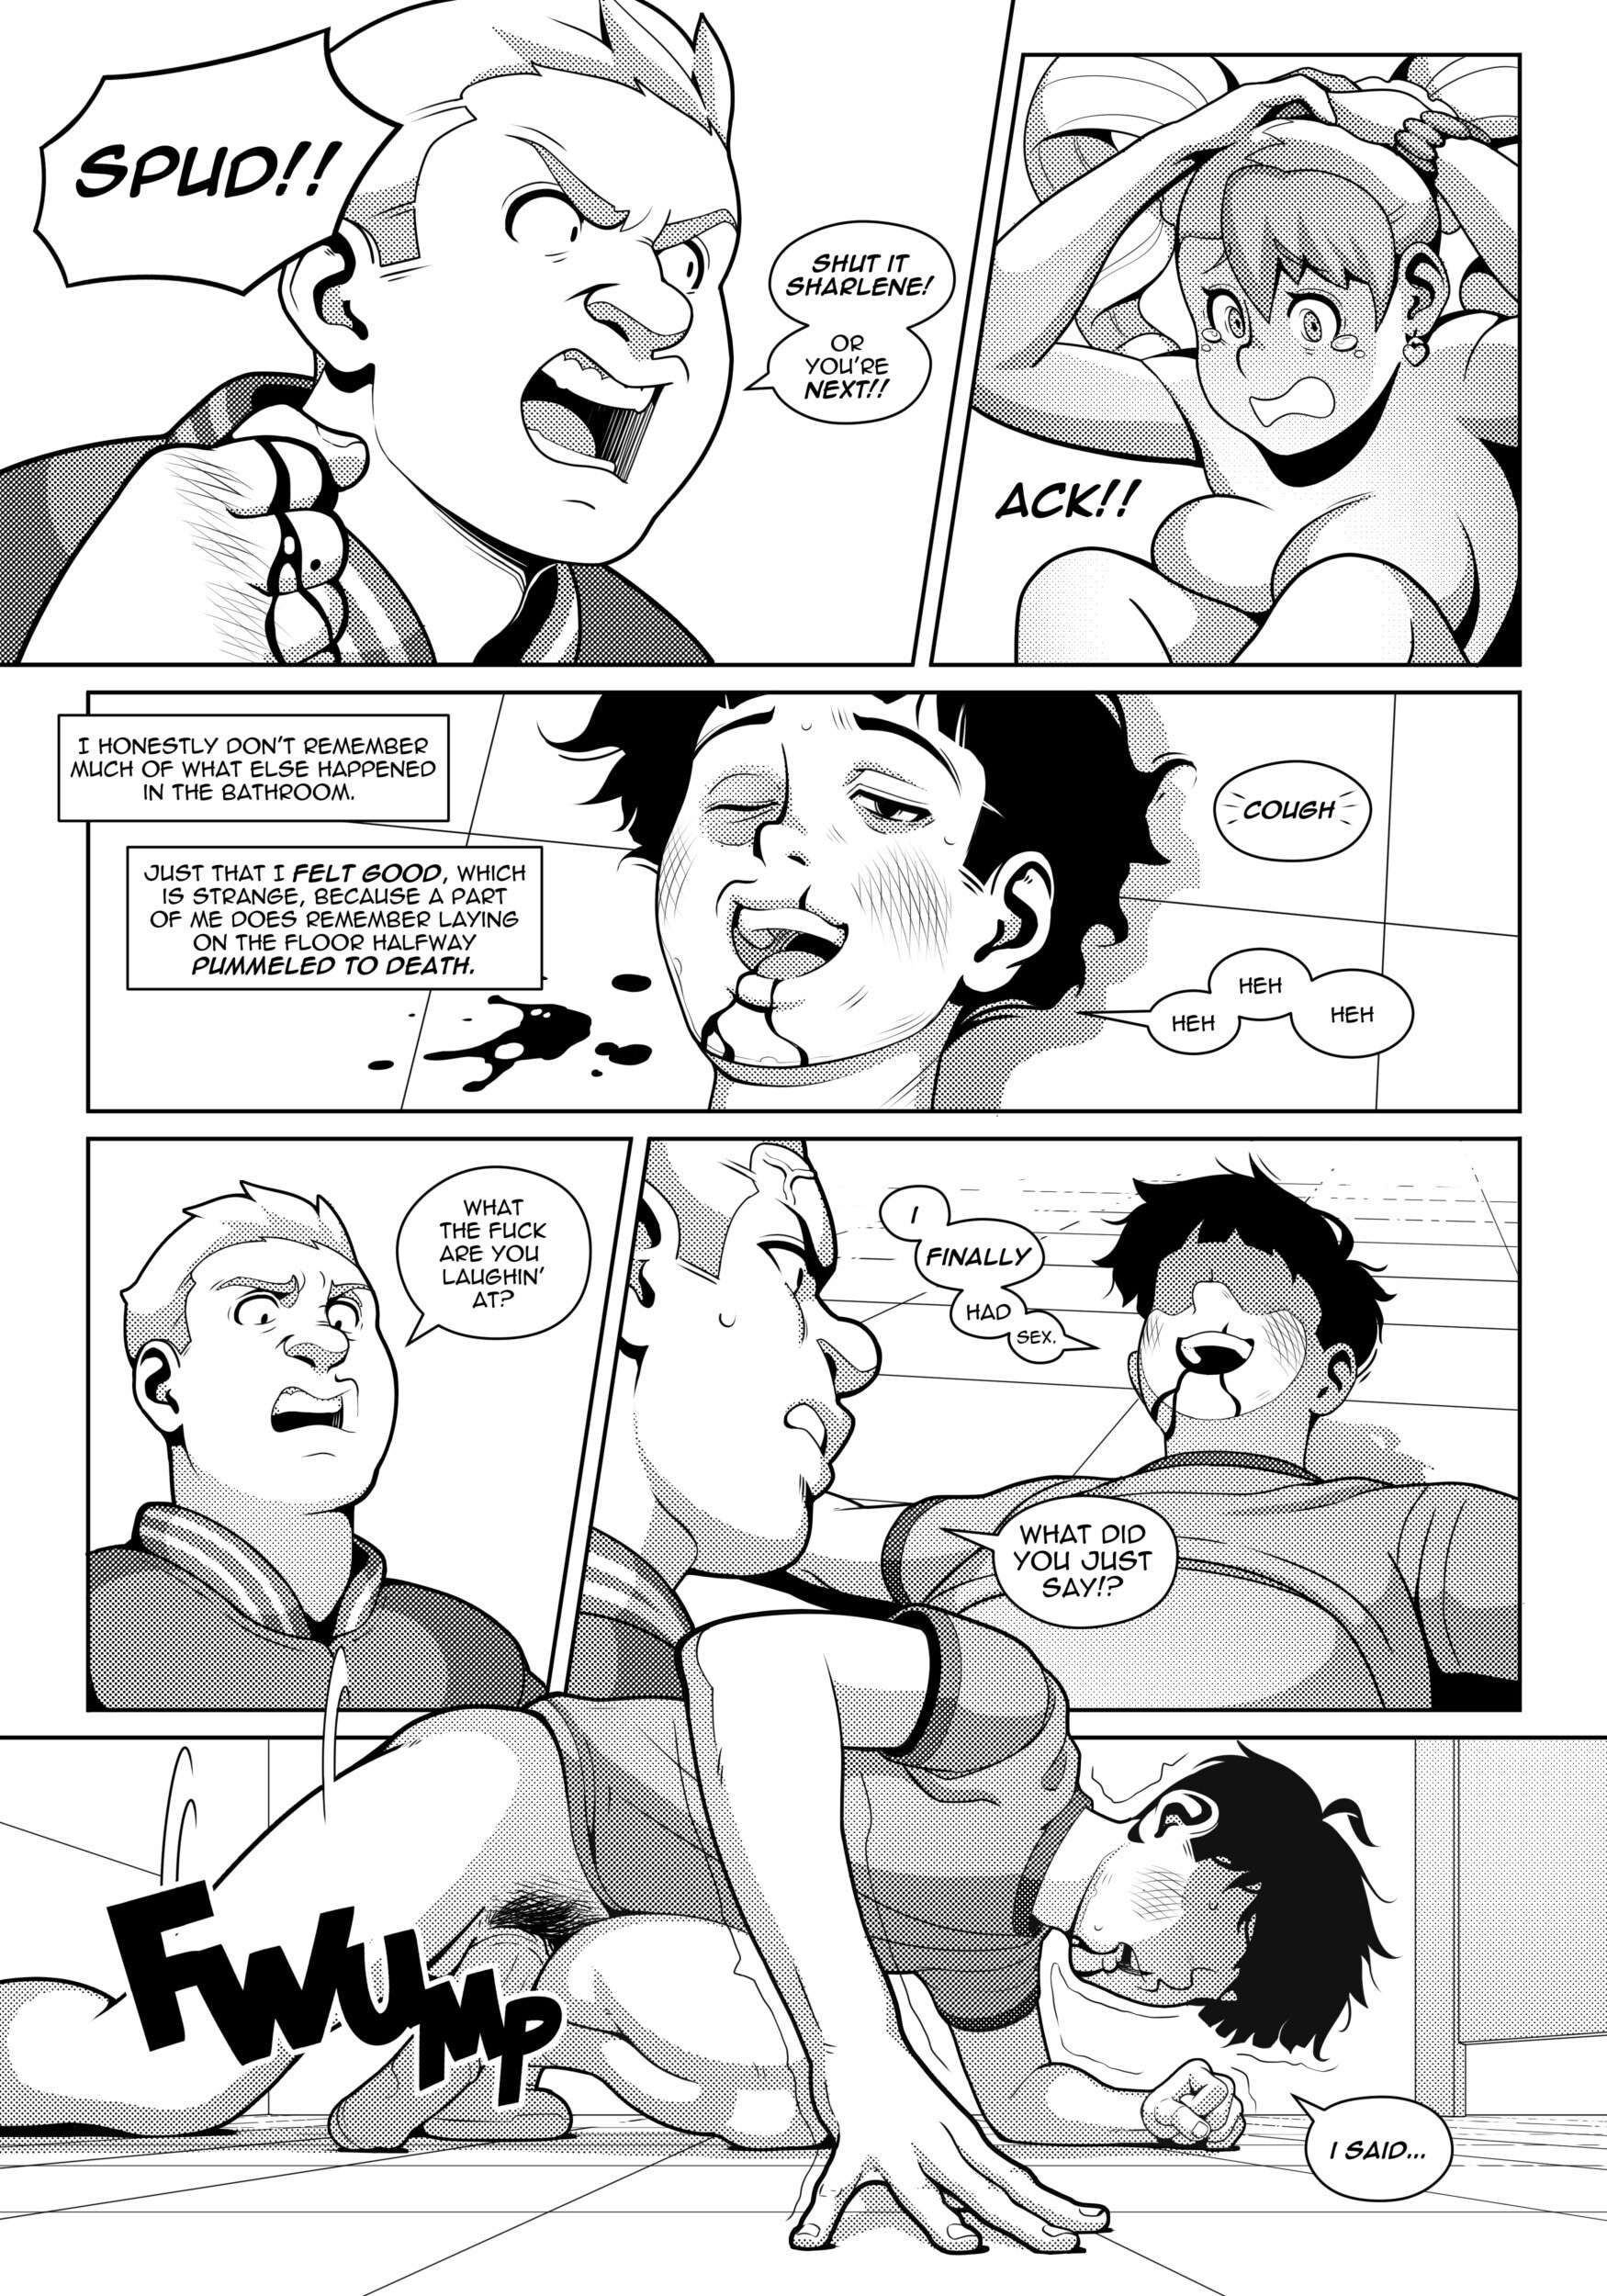 Hot Shit High! - Page 26